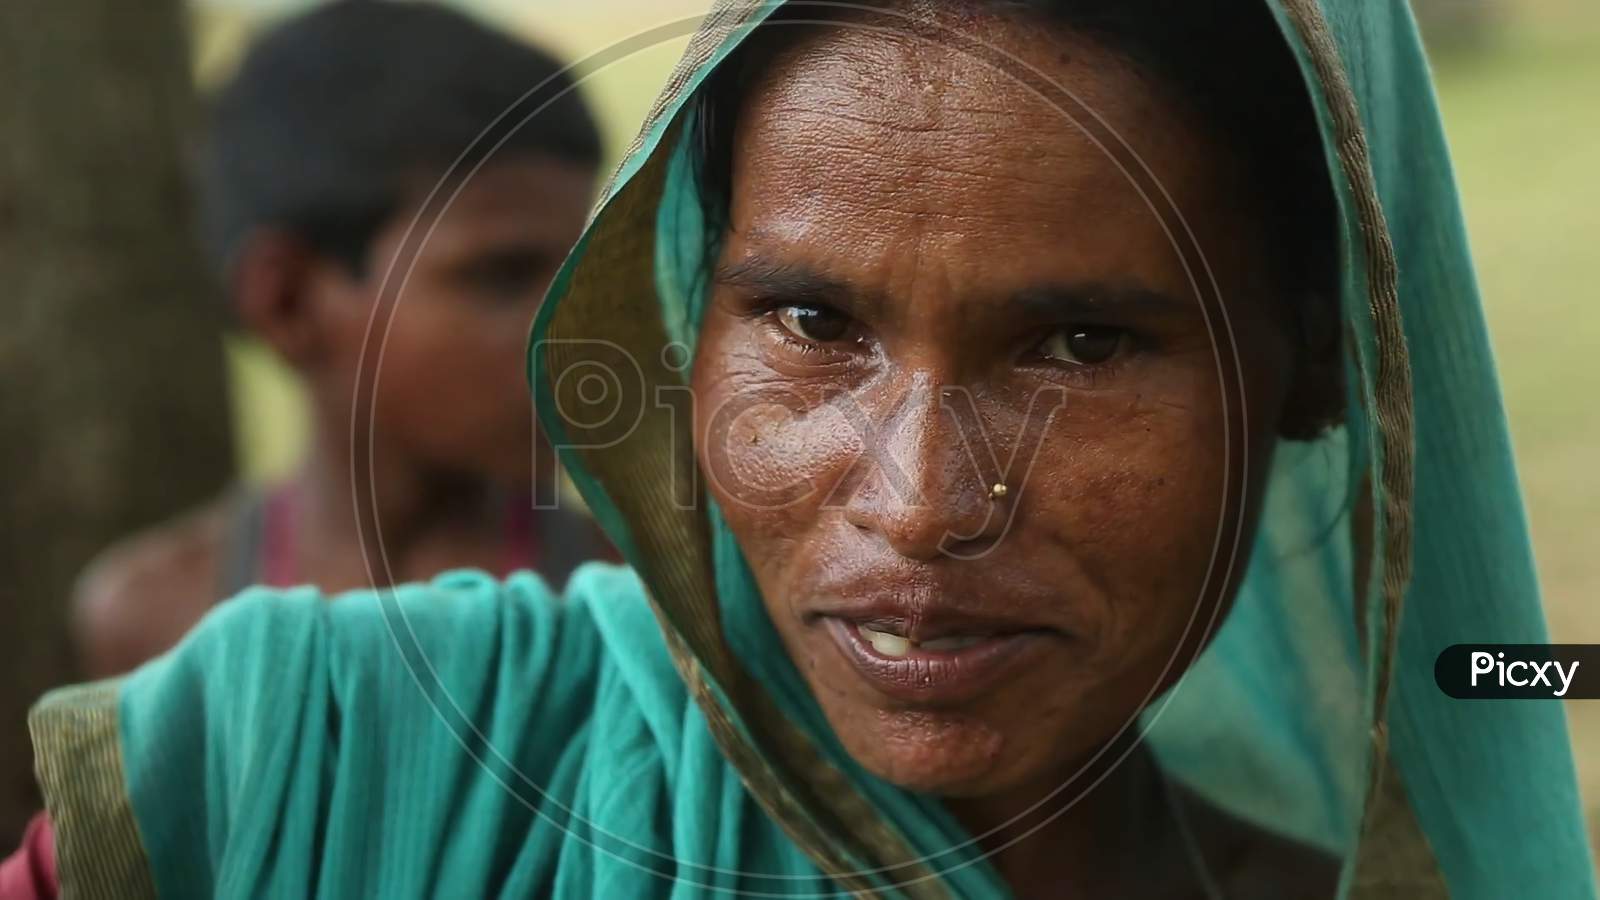 rural women of Indian ethnicity sitting portrait in the crowds. Blurry background image.